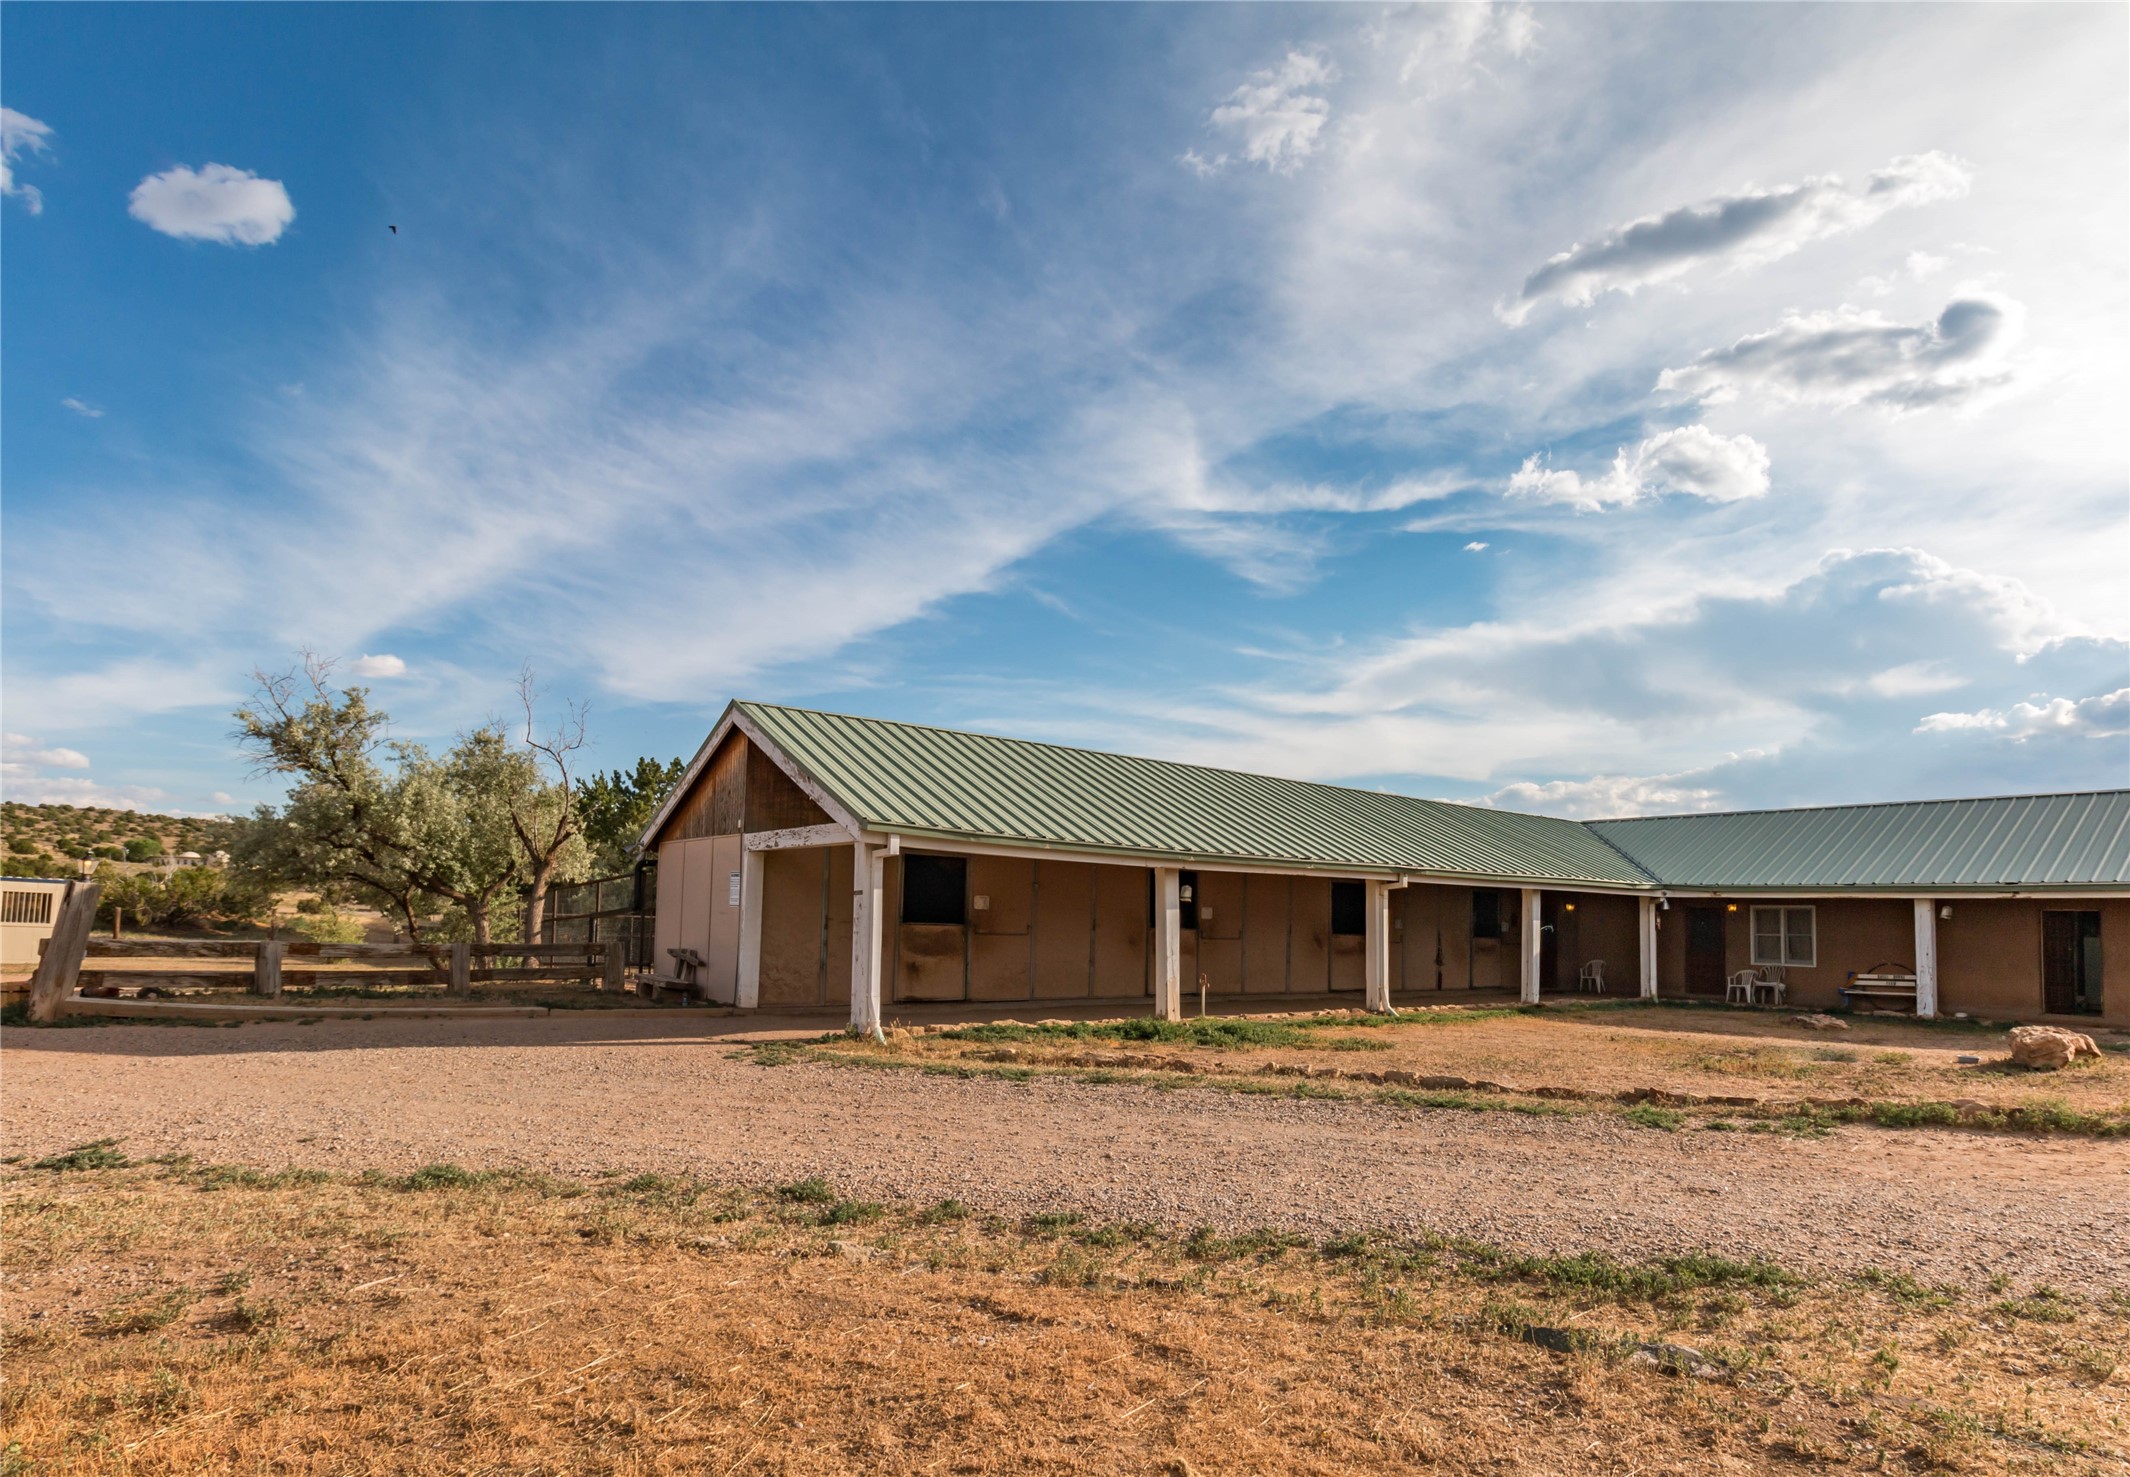 70 Goose Downs Road, Lamy, New Mexico 87540, 7 Bedrooms Bedrooms, ,8 BathroomsBathrooms,Residential,For Sale,70 Goose Downs Road,202231629